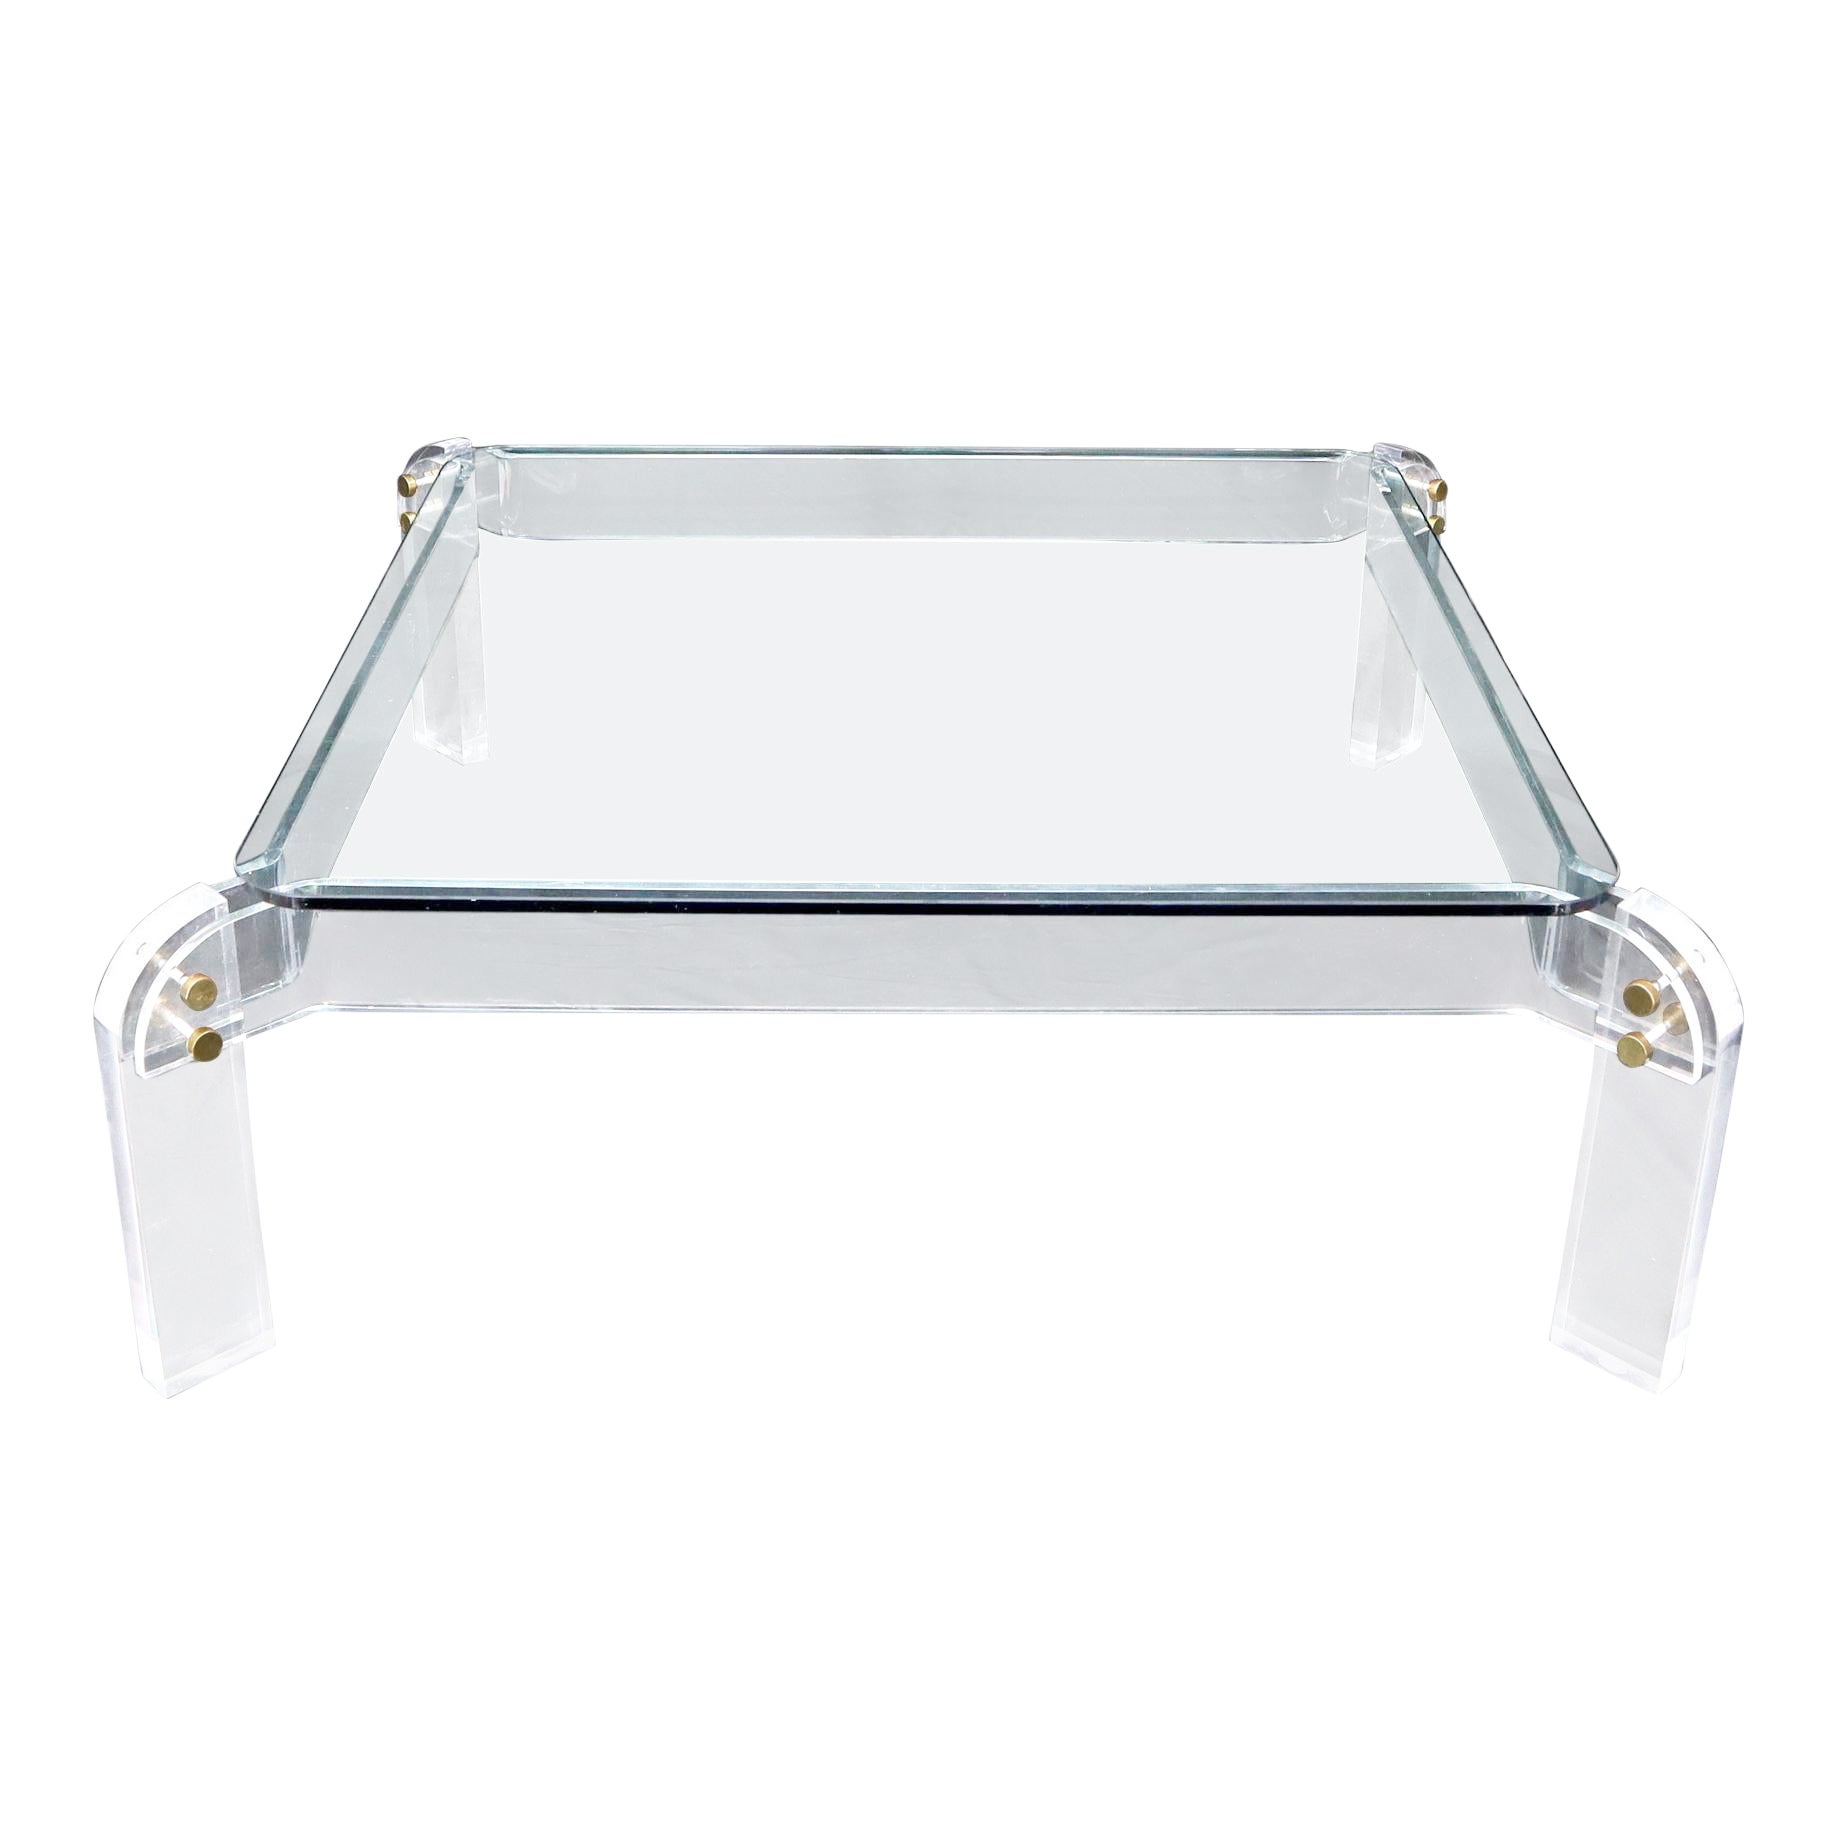 Large Lucite Base Square Glass Top Coffee Table